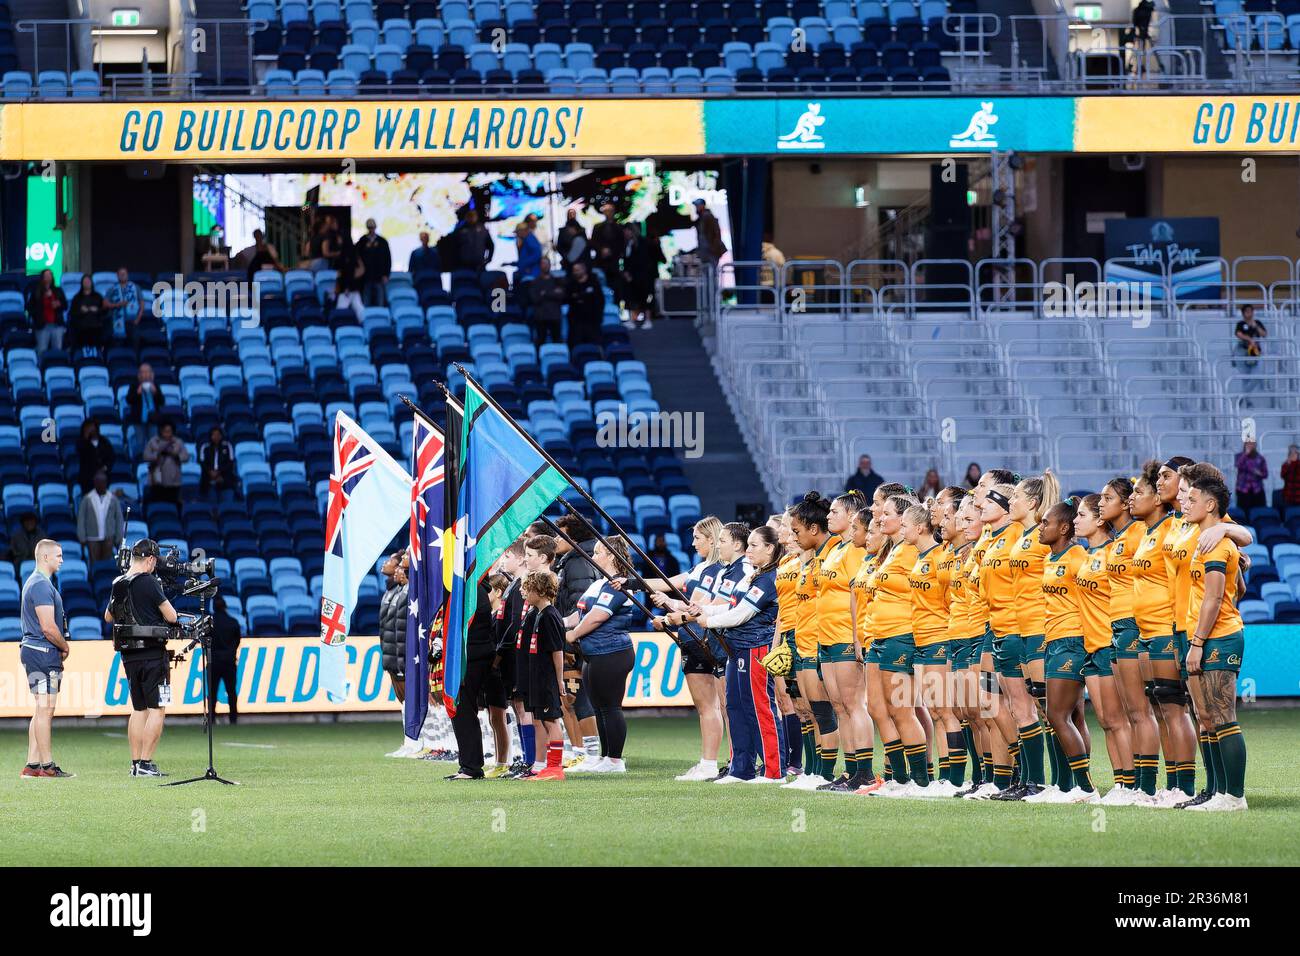 The Australian Wallaroos line up for the national anthems before the Rugby Women's International match between Australia and the Fiji at Allianz Stadi Stock Photo